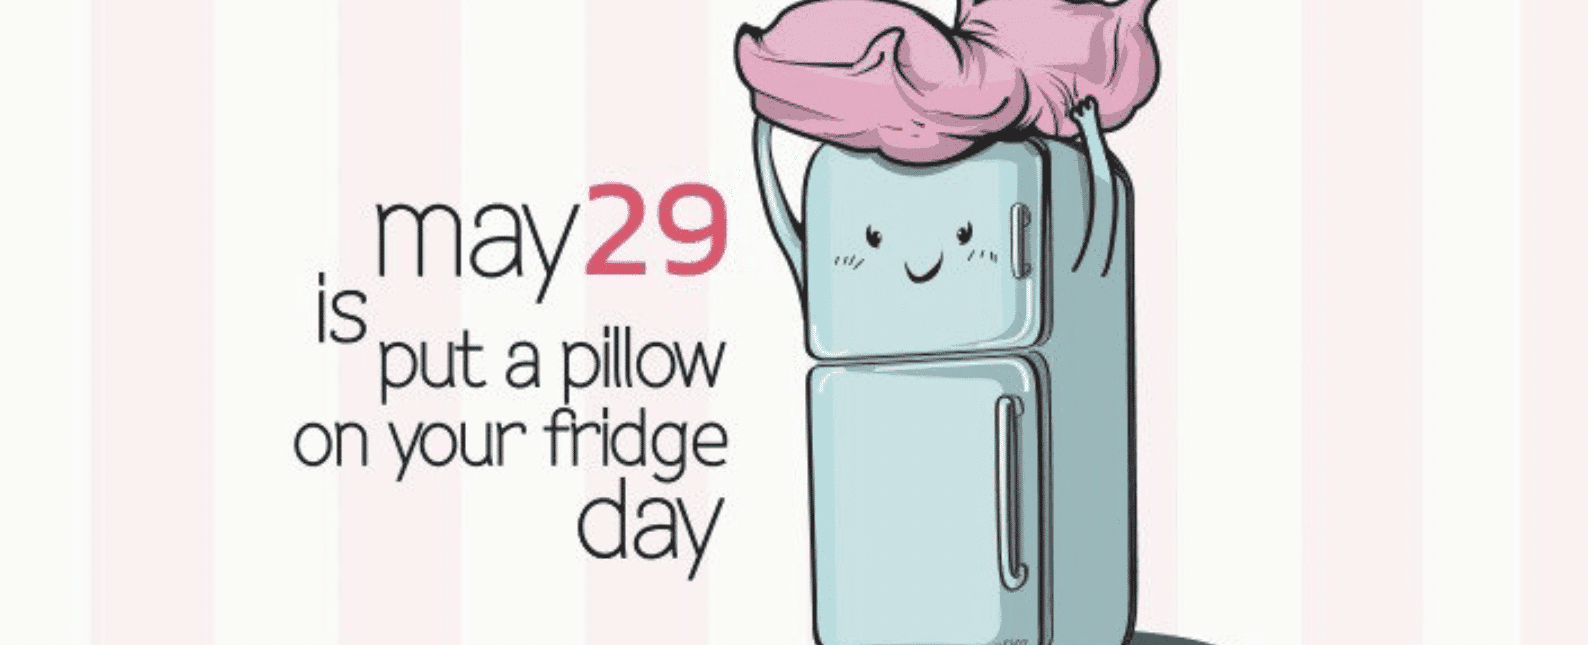 29th may is officially put a pillow on your fridge day